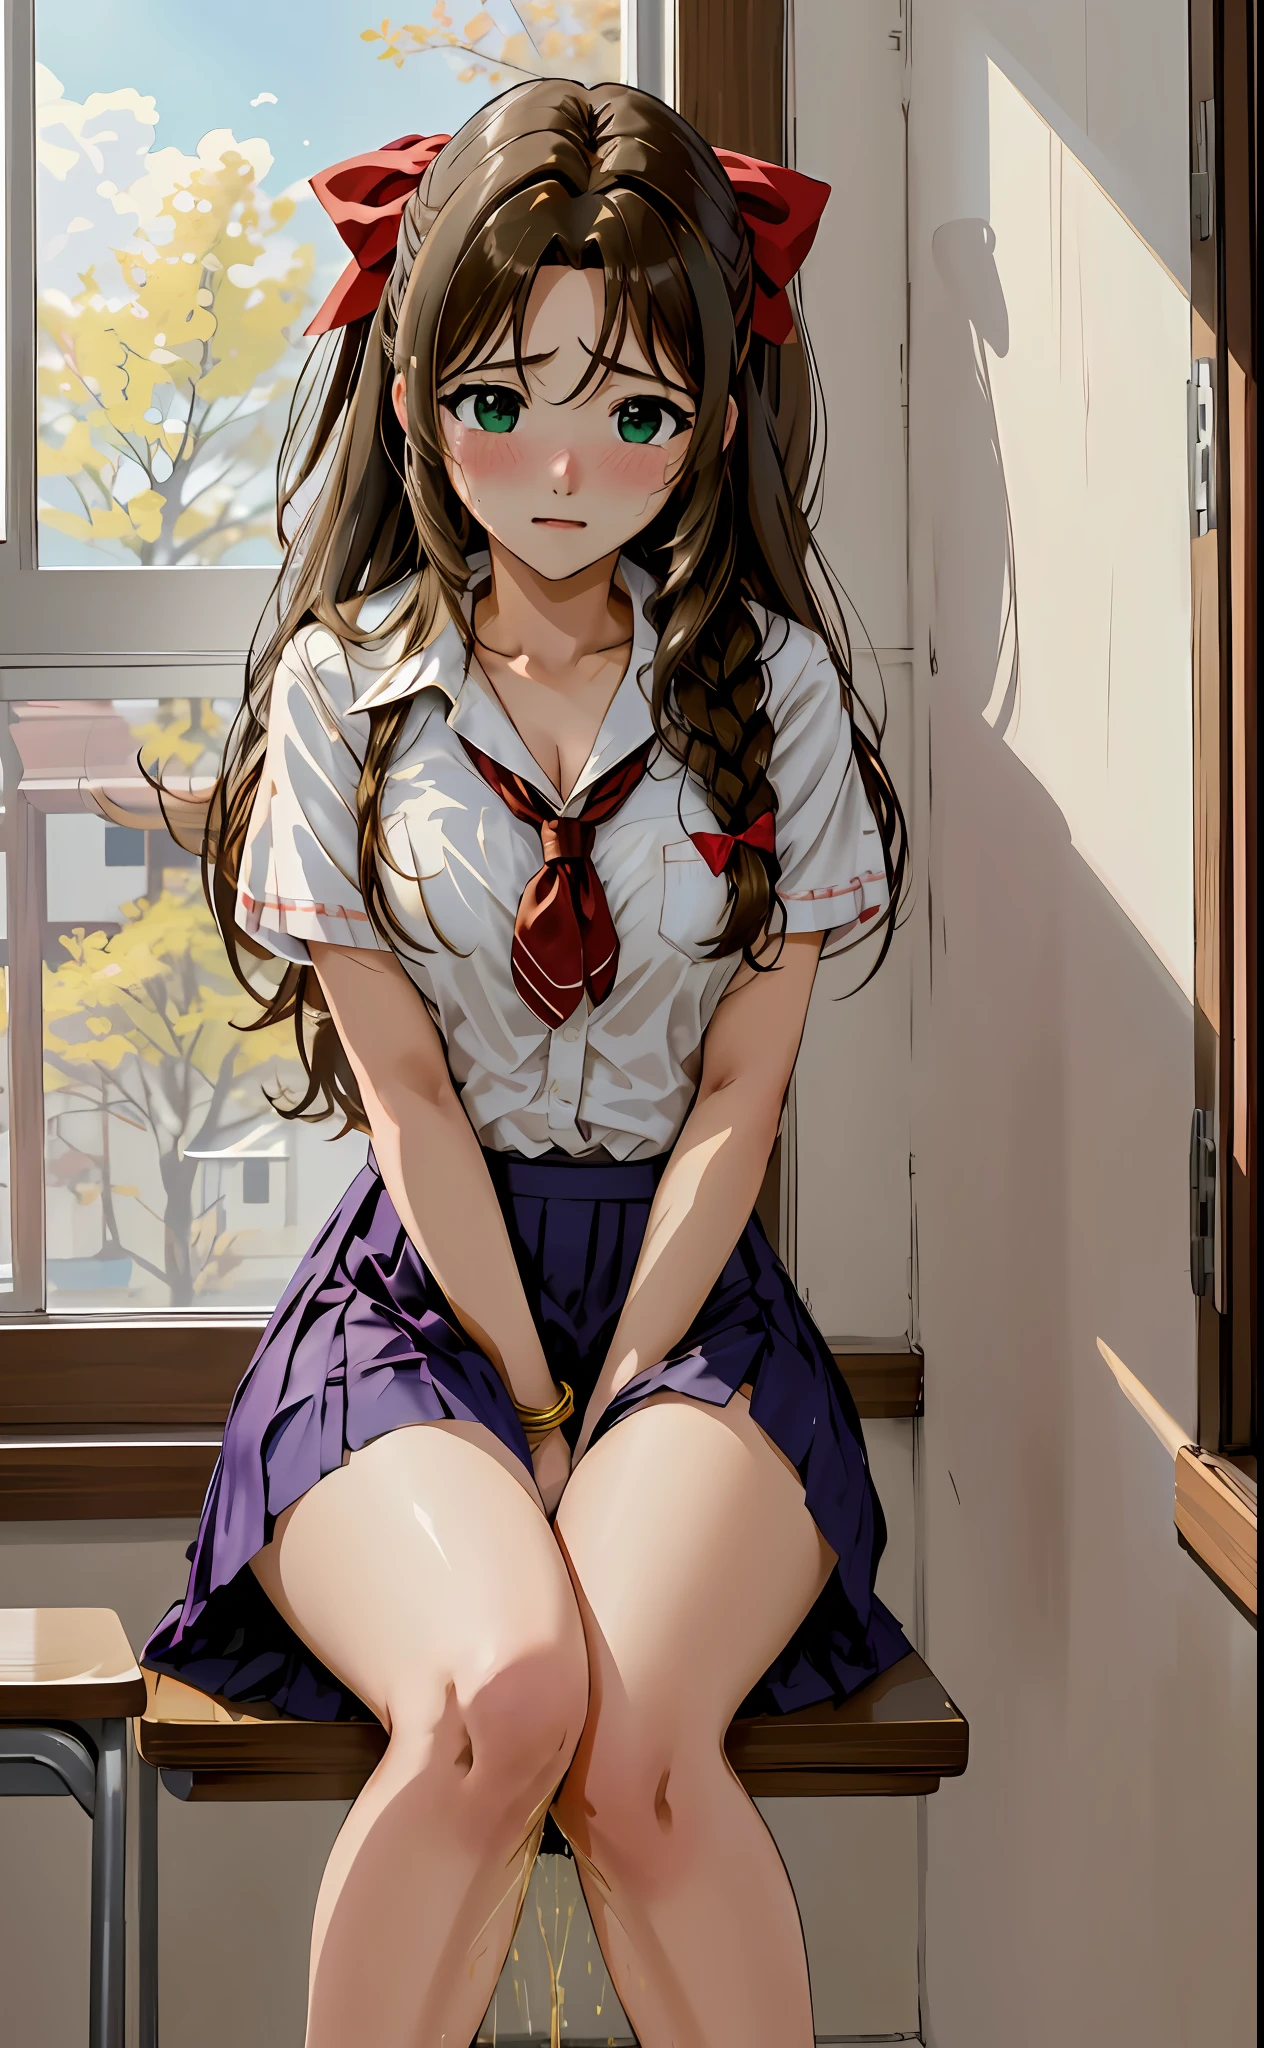 indoors, busy classroom, sitting, a3r1th, upskirt panties view, legs together, a3r1th, peeing, peeing herself, perfect female figure, Aerith Gainsborough, pantyhose, holding pen, green eyes, , hair bow, bracelet,  skirt, looking down nervously, shy, embarrassed, sad, crying, aroused, shocked, panicking, worried, very desperate to pee, urination, legs crossed, rape face, full-face blush, high detail, Realism, Hyperrealism, multiple views, perspective, ccurate, masterpiece, highres, UHD, anatomically correct, super detail, best quality, highres, 8k